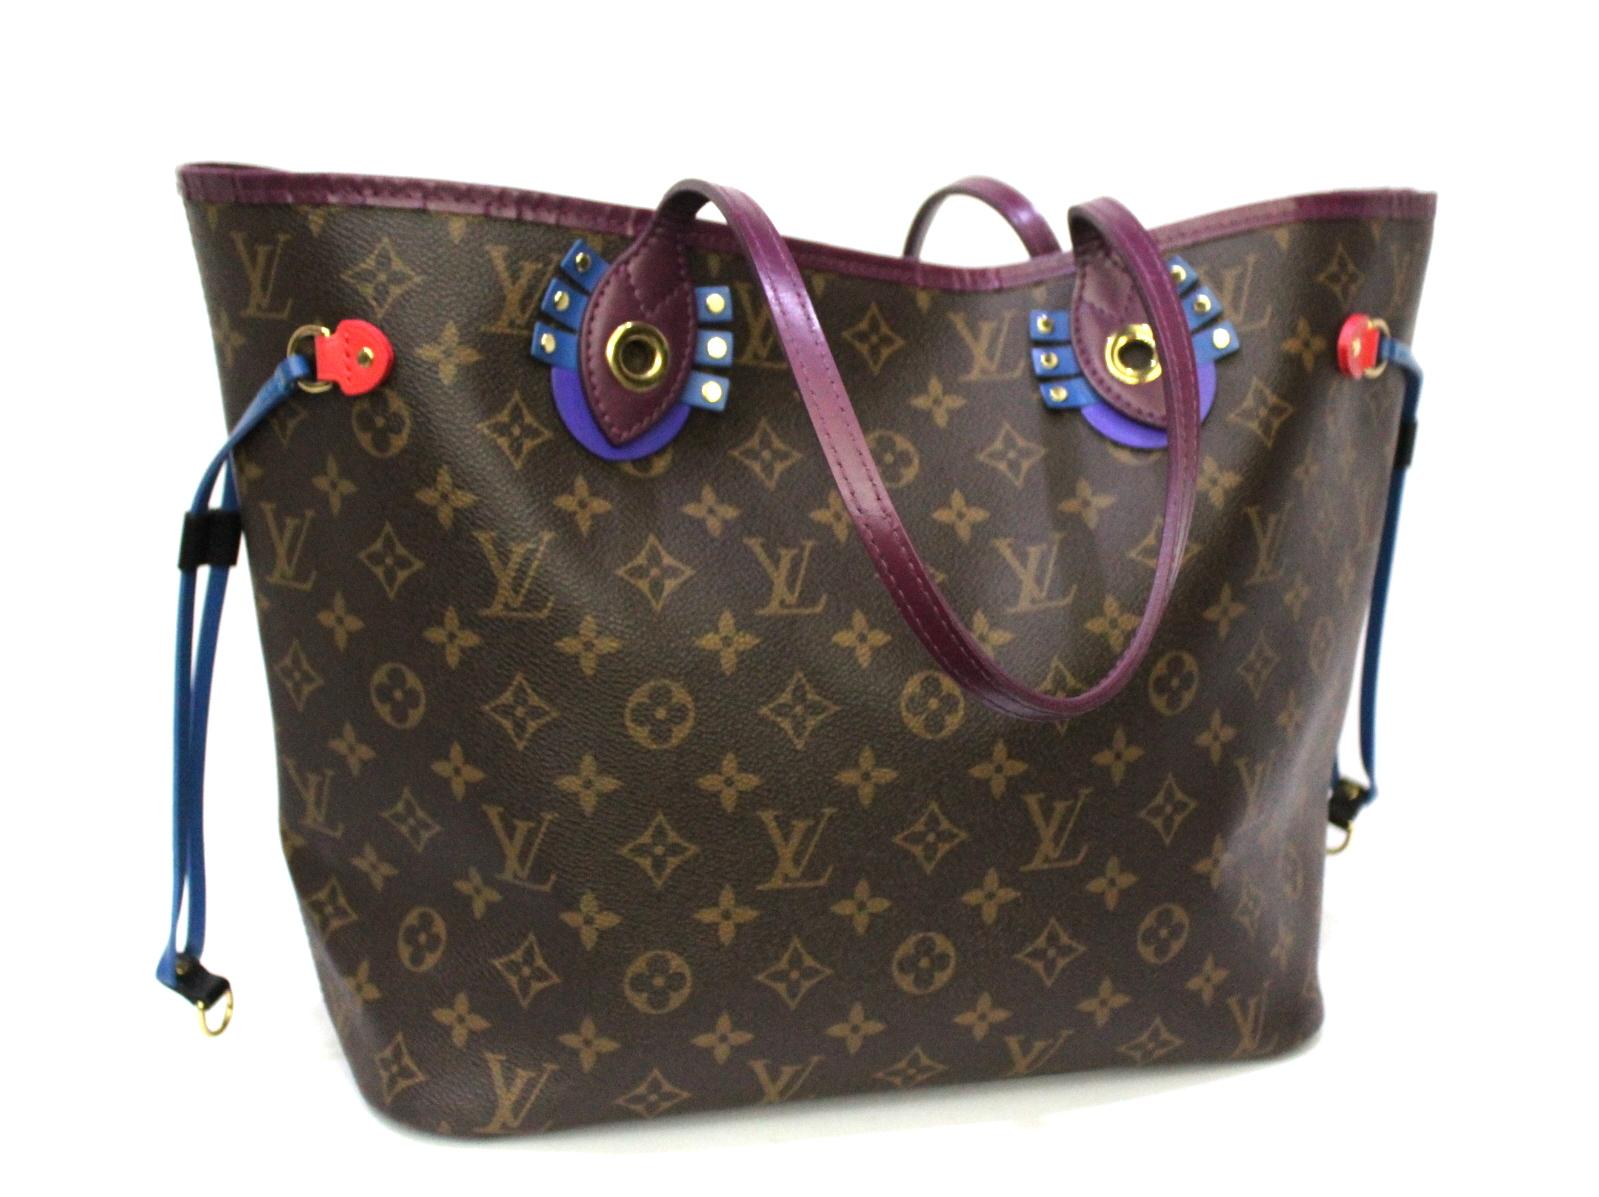 Louis Vuitton bag, Neverfull Totem model, size MM in Monogram pattern.
Colored leather details, purple handles and interior. Practical and capacious.
This fantastic bag is in excellent condition.